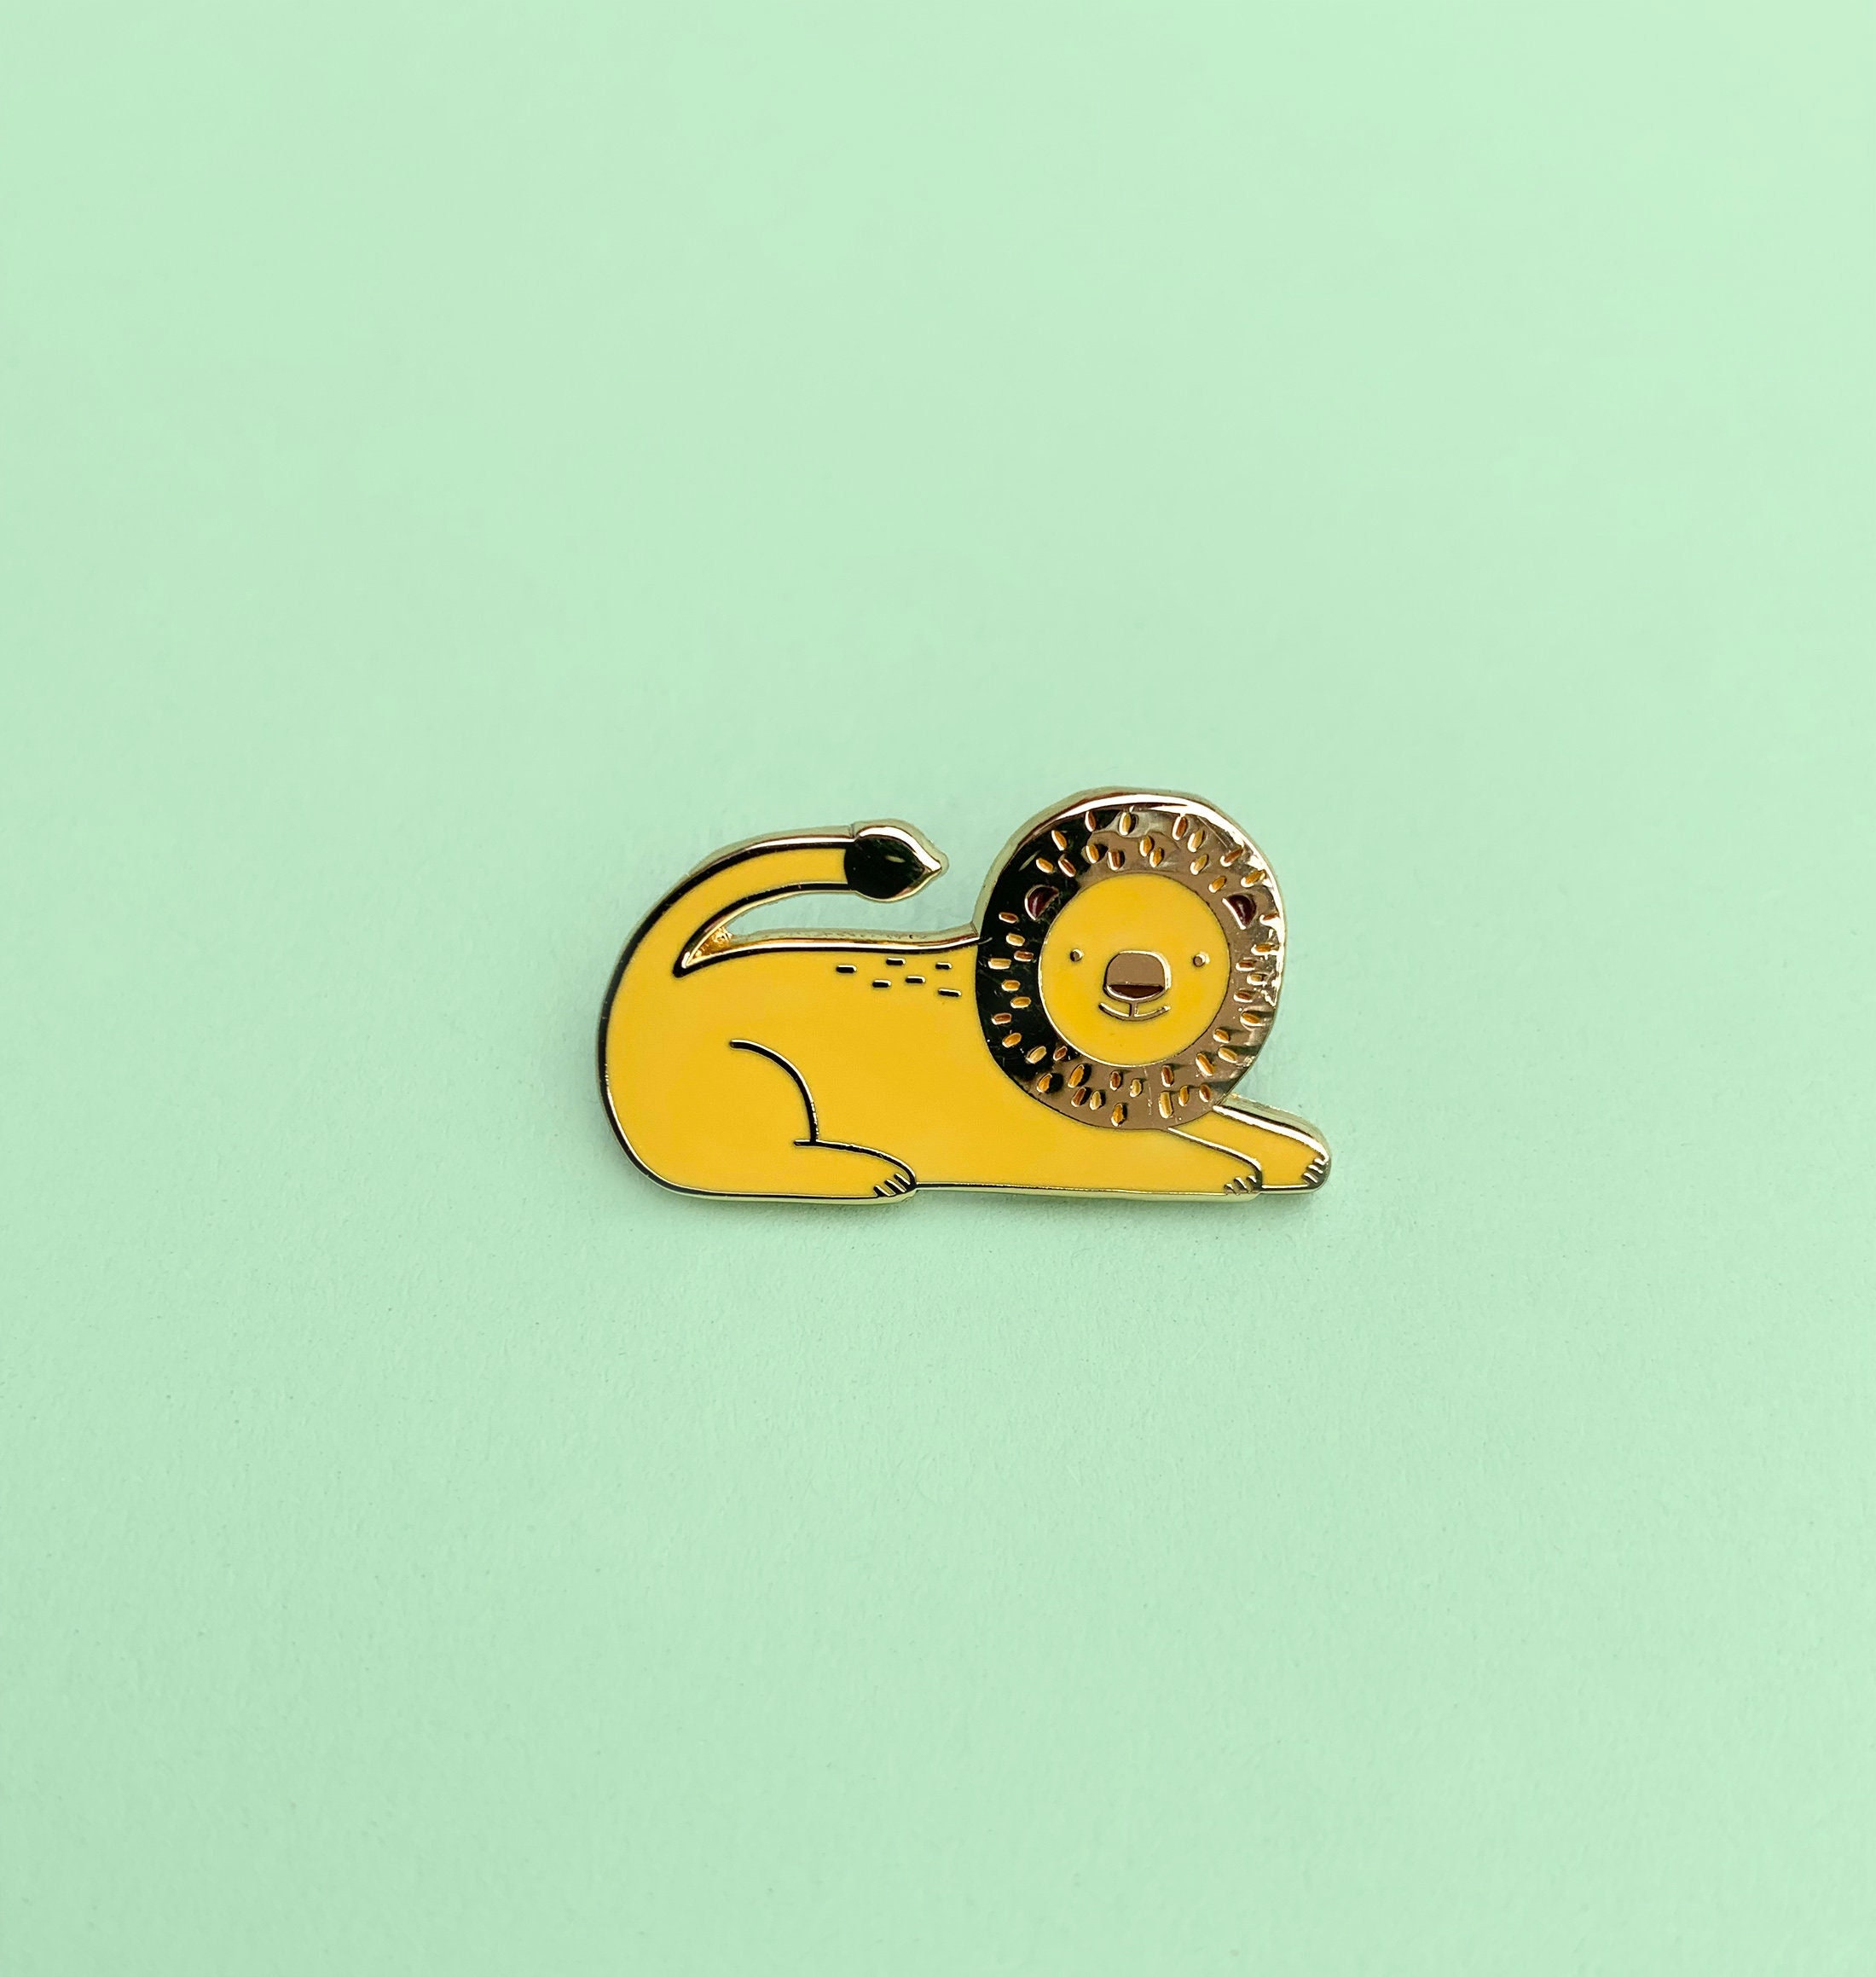  Funny Enamel Pin Set, Funny Hard Enamel Pin, Gold Lapel Pins  for Jacket Hat, Small Gift for Friend, Gold Pin Badge